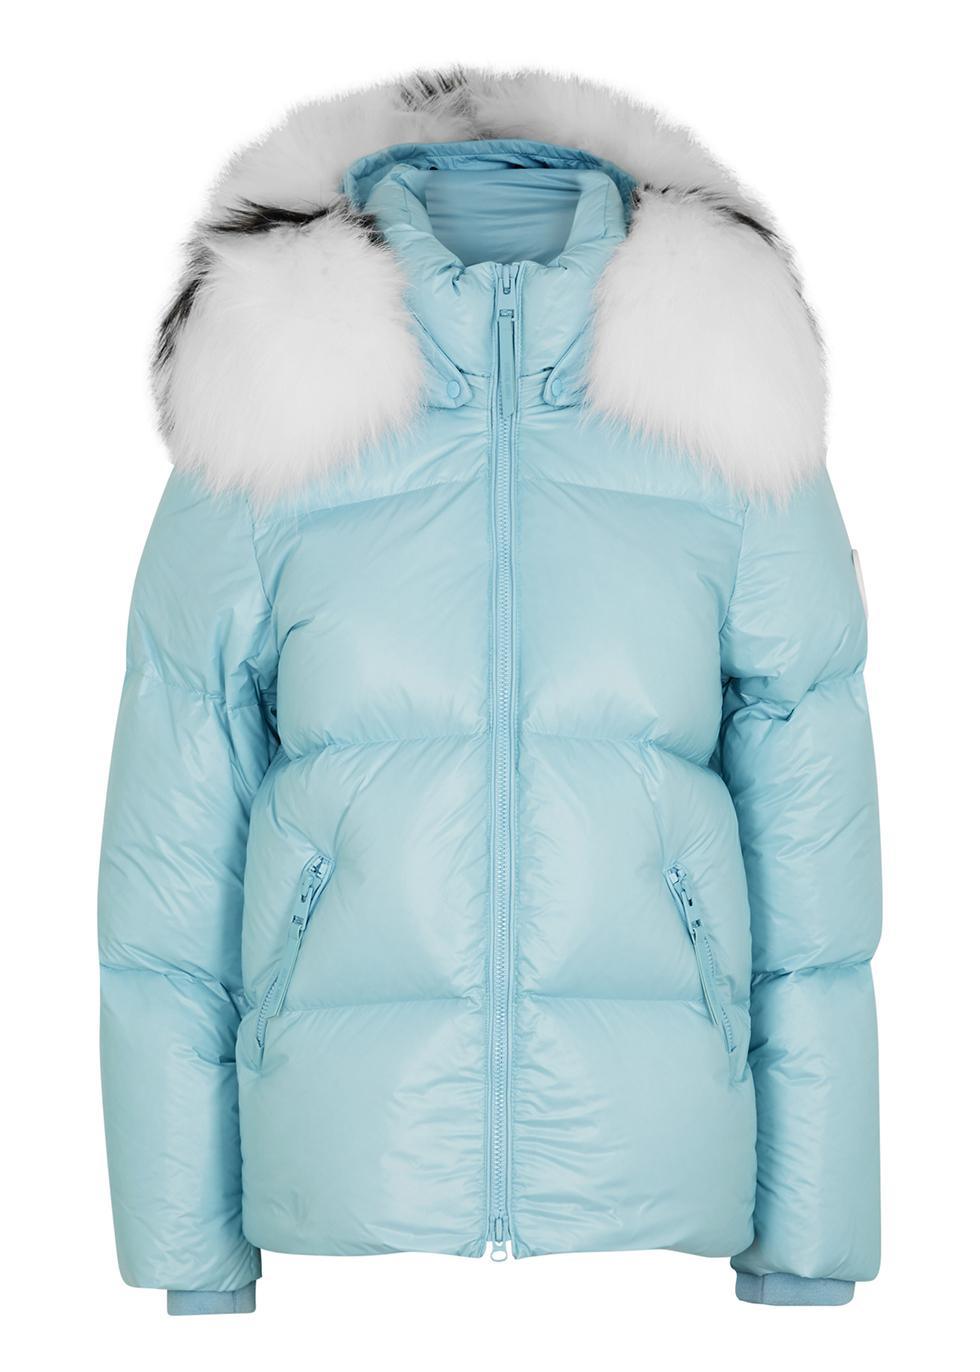 Light blue fur-trimmed quilted shell jacket by ARCTIC ARMY